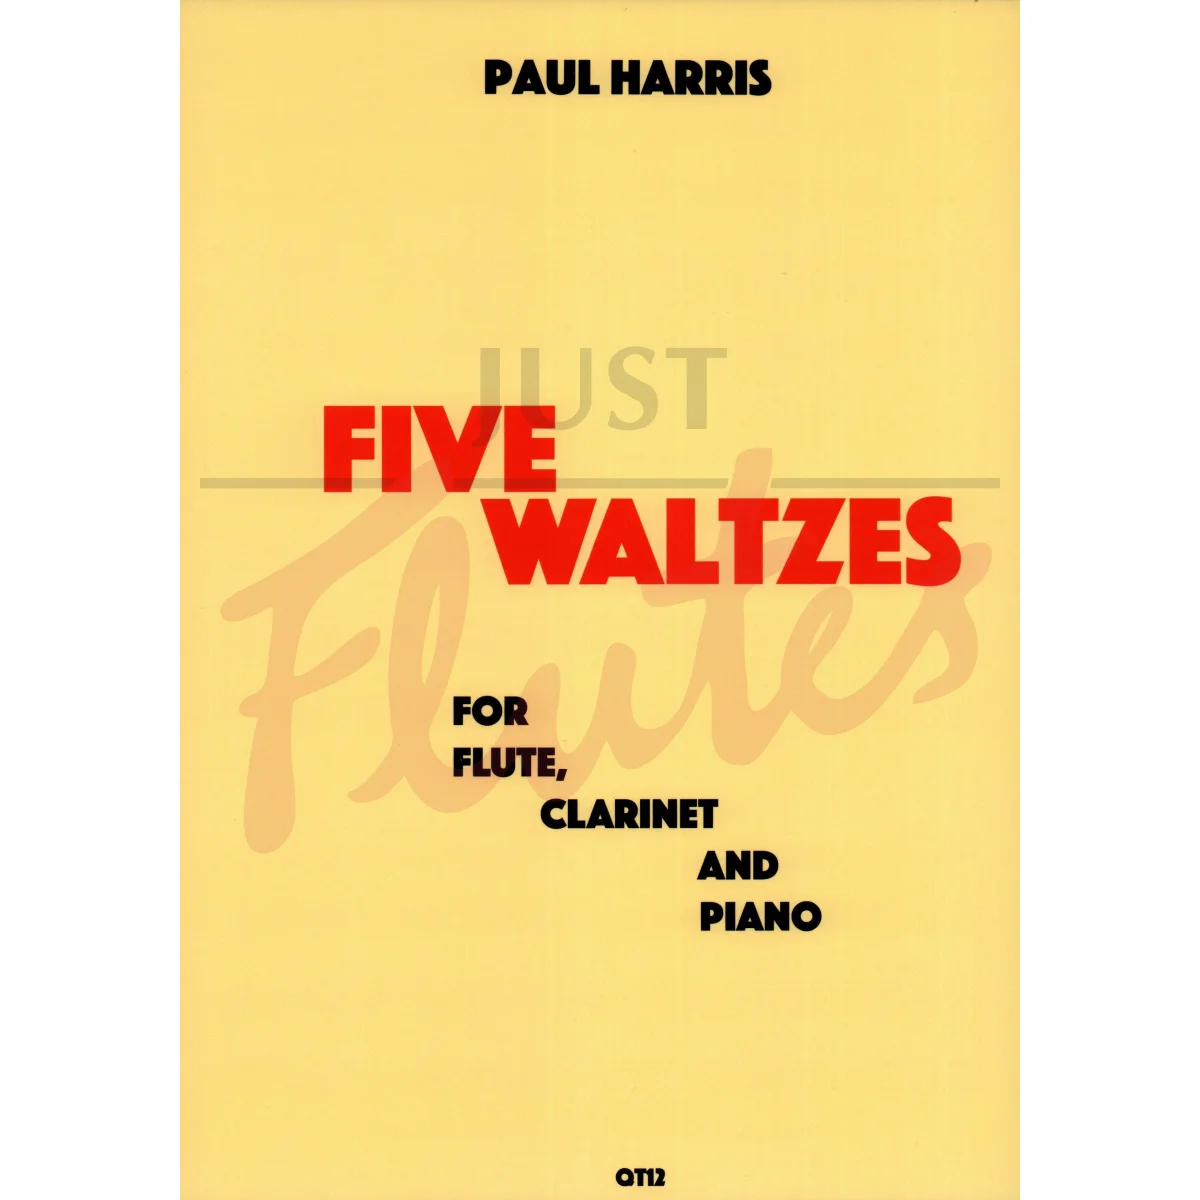 Five Waltzes for Flute, Clarinet and Piano